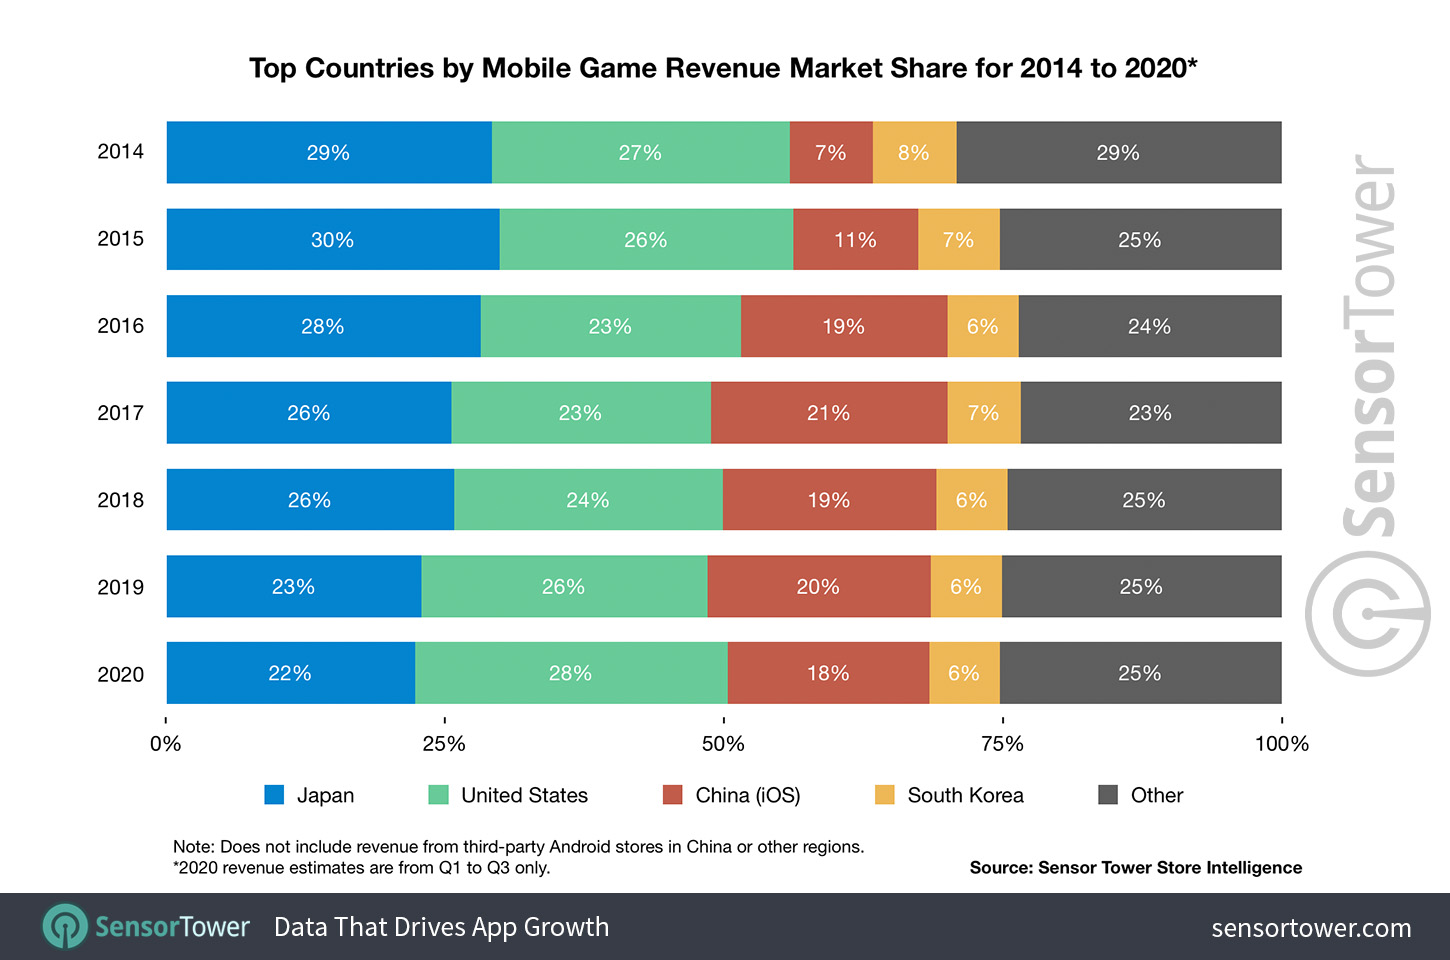 Top Countries by Mobile Game Revenue Market Share 2014 to 2020